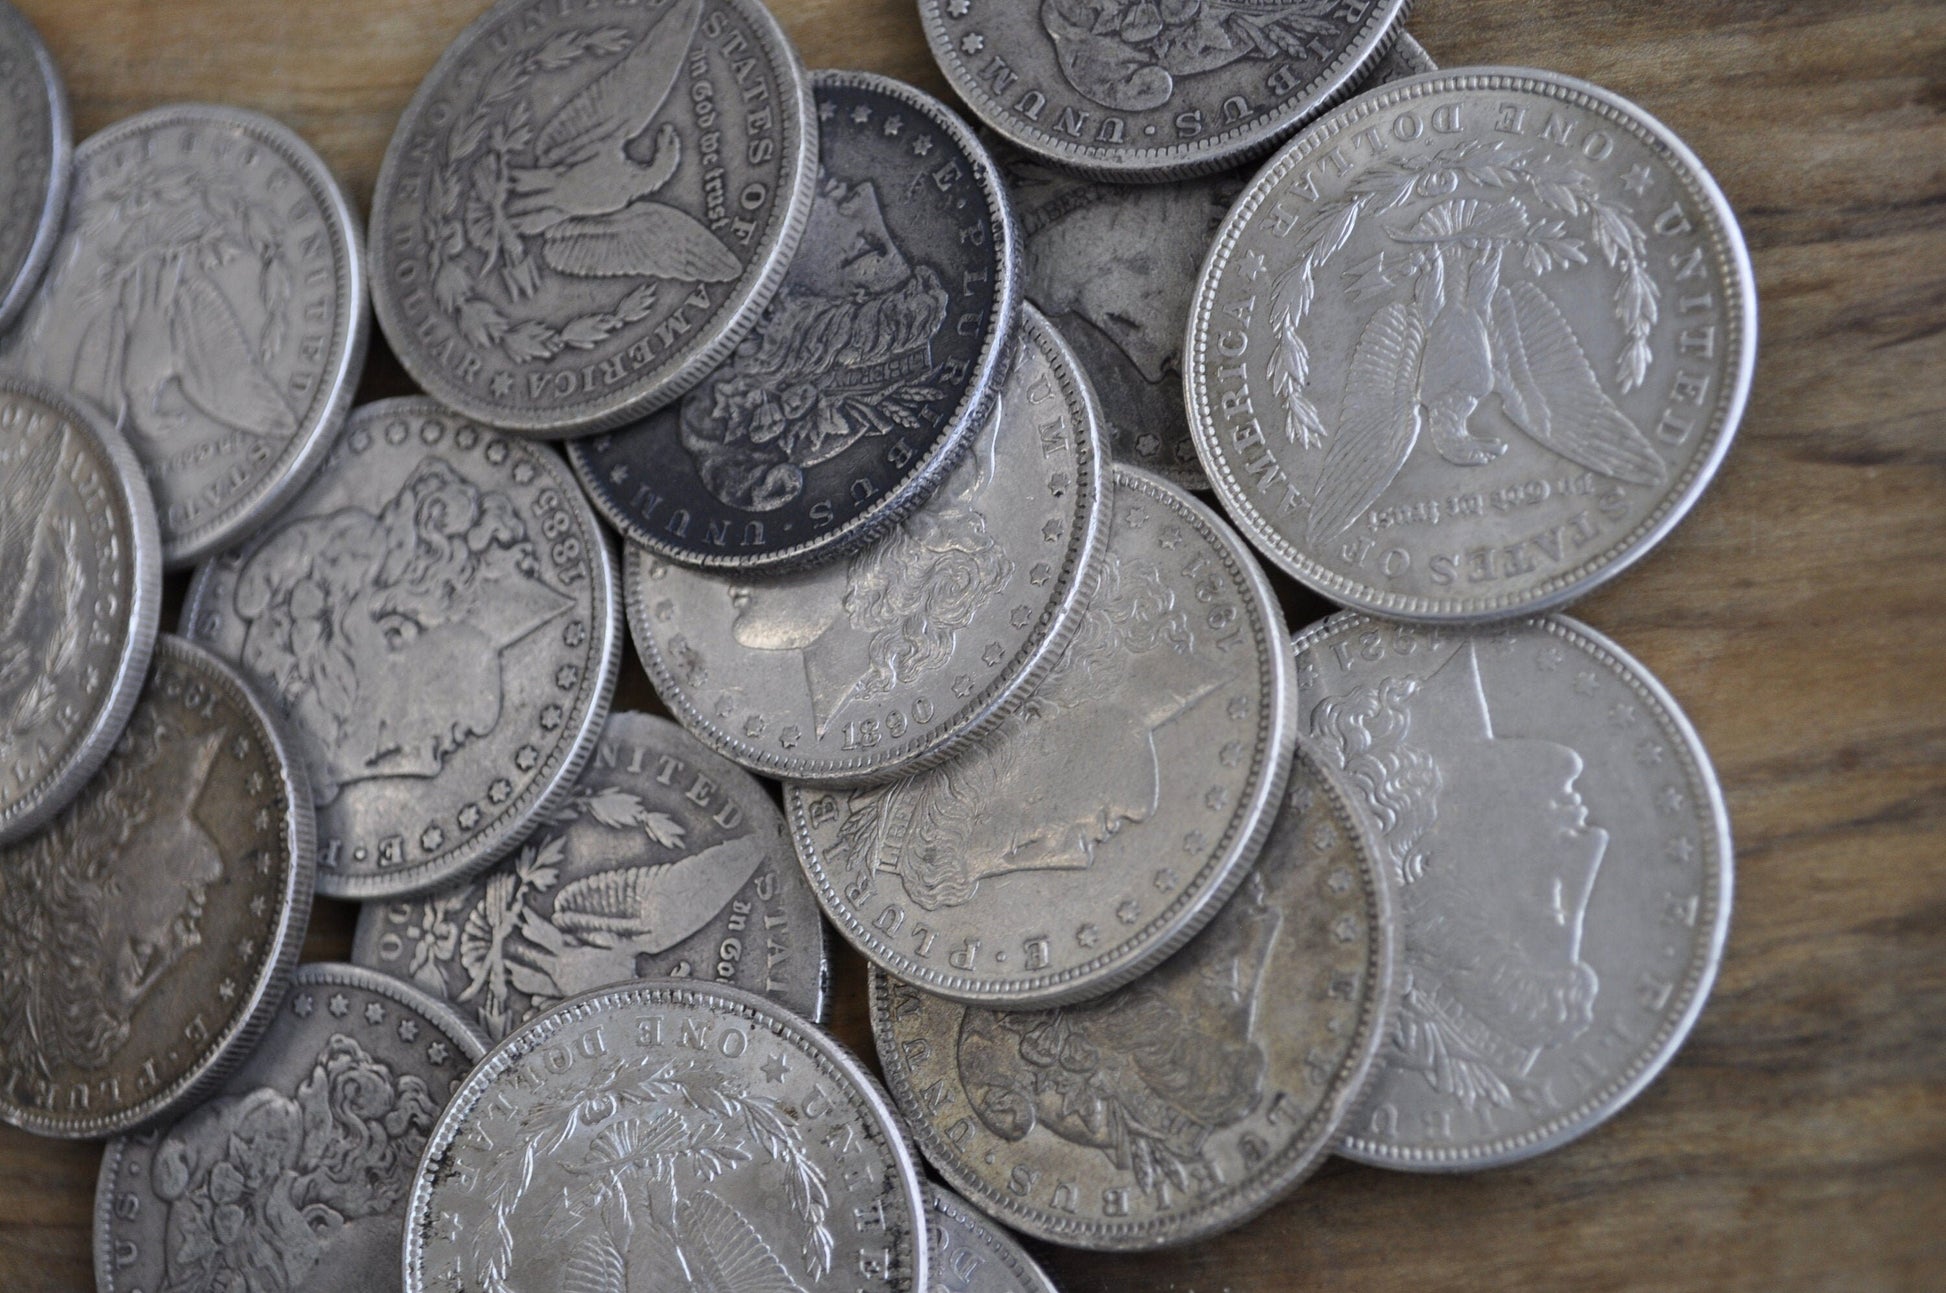 Lot of Morgan Silver Dollars - Choose Lot Type and Size - Mix of grades, conditions, dates Wholesale Bulk Silver Dollars US Bulk Silver Coin